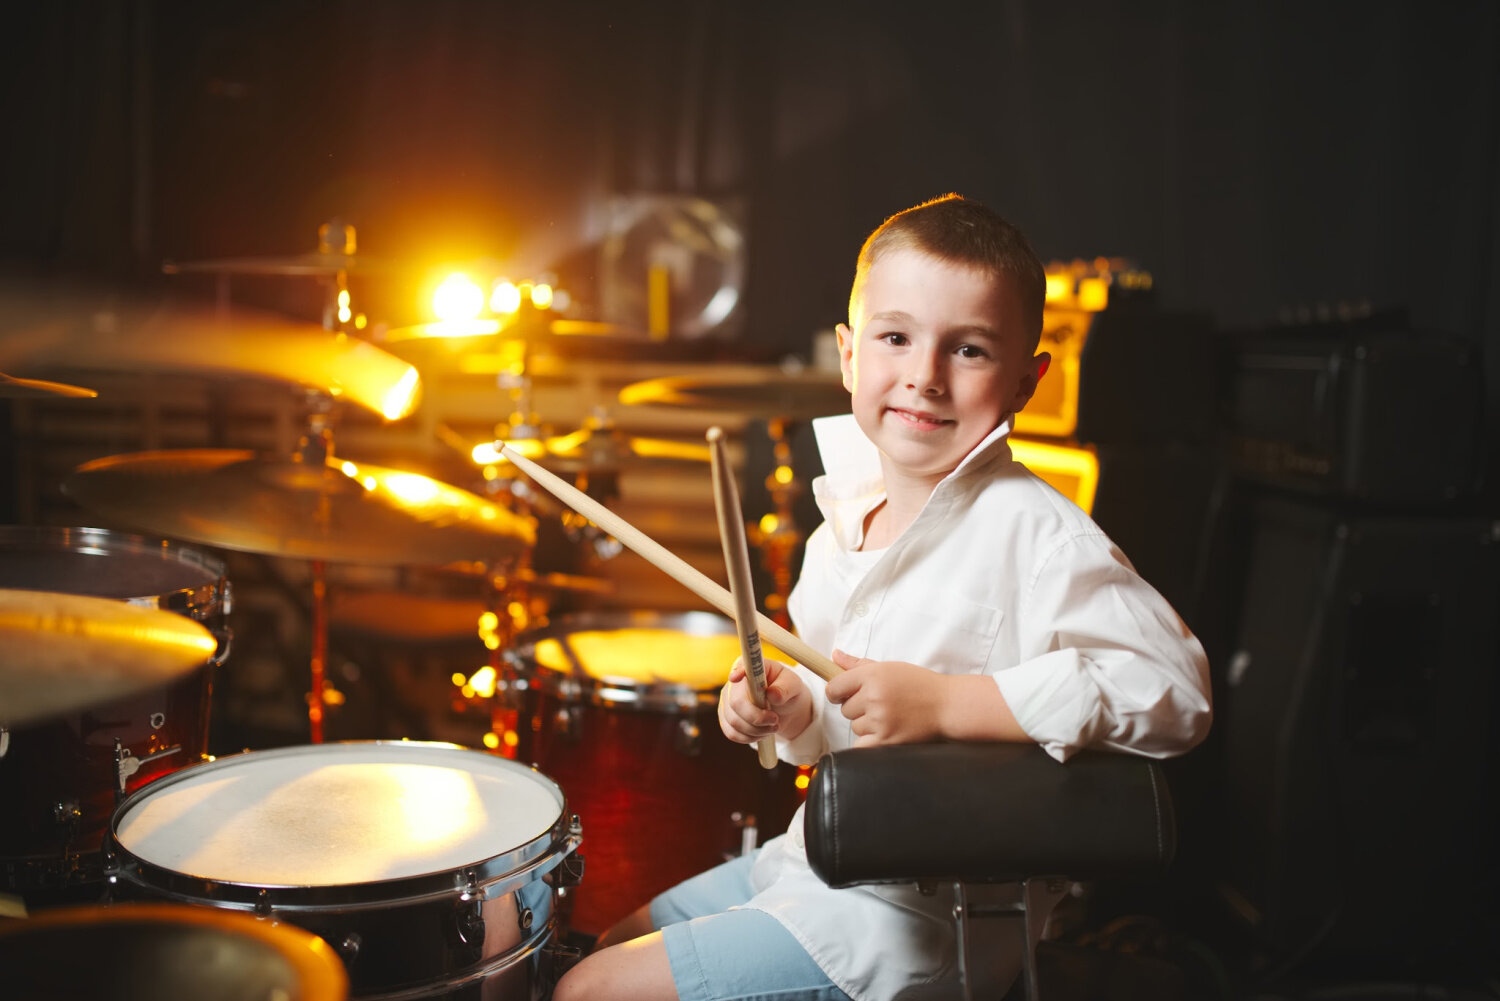   Drum Lessons   in Mendota Heights   for beginner, intermediate, and advanced students of all ages   CALL  651-263-9475  TO SCHEDULE YOUR FIRST LESSON   REQUEST INFO  